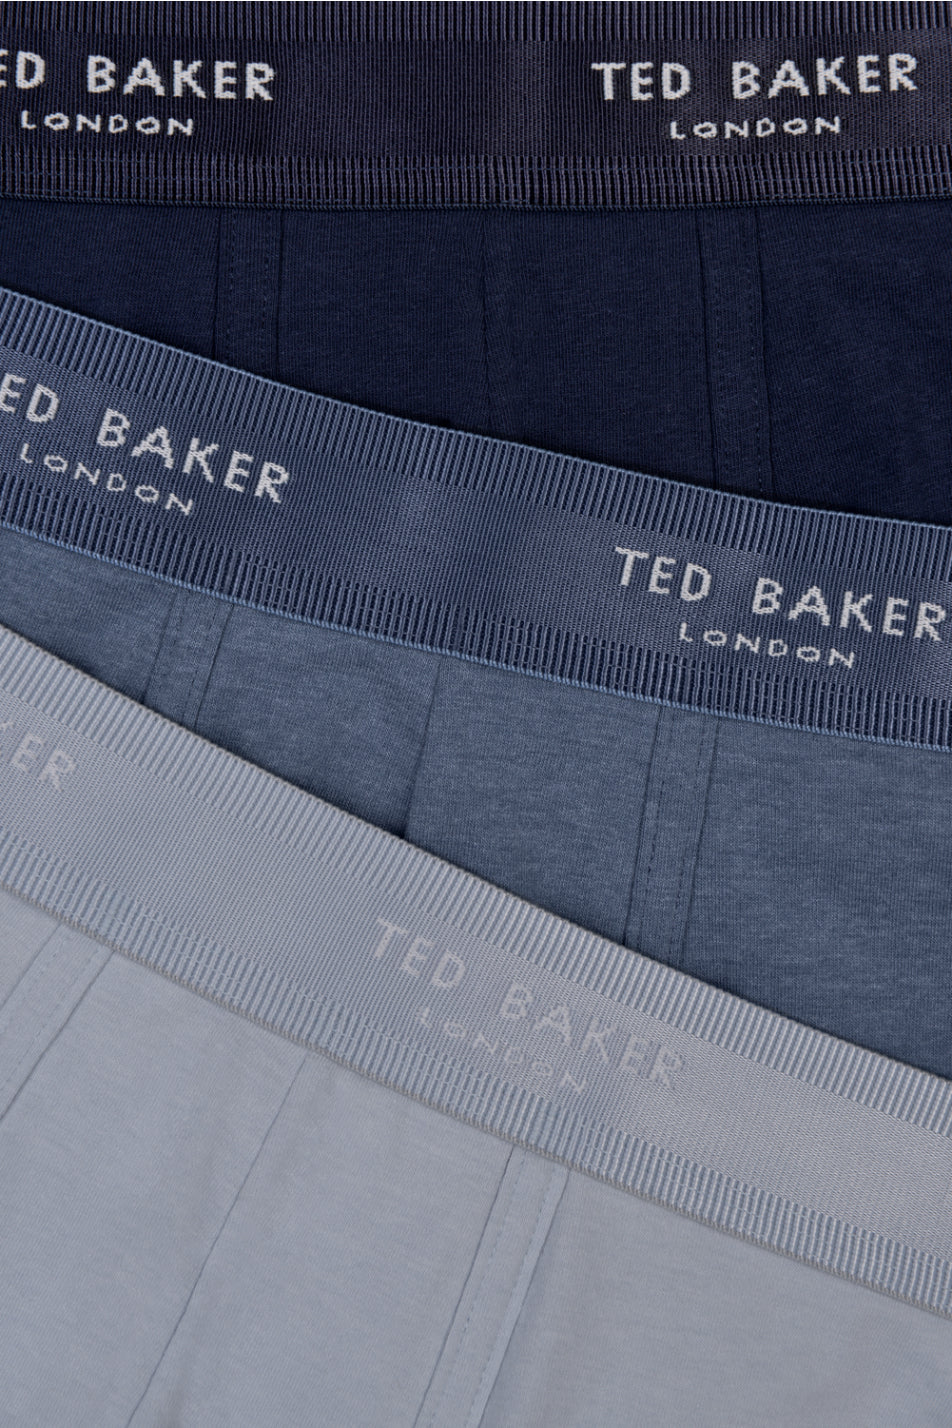 Ted Baker 3 Pack Men's Cotton Fashion Trunk